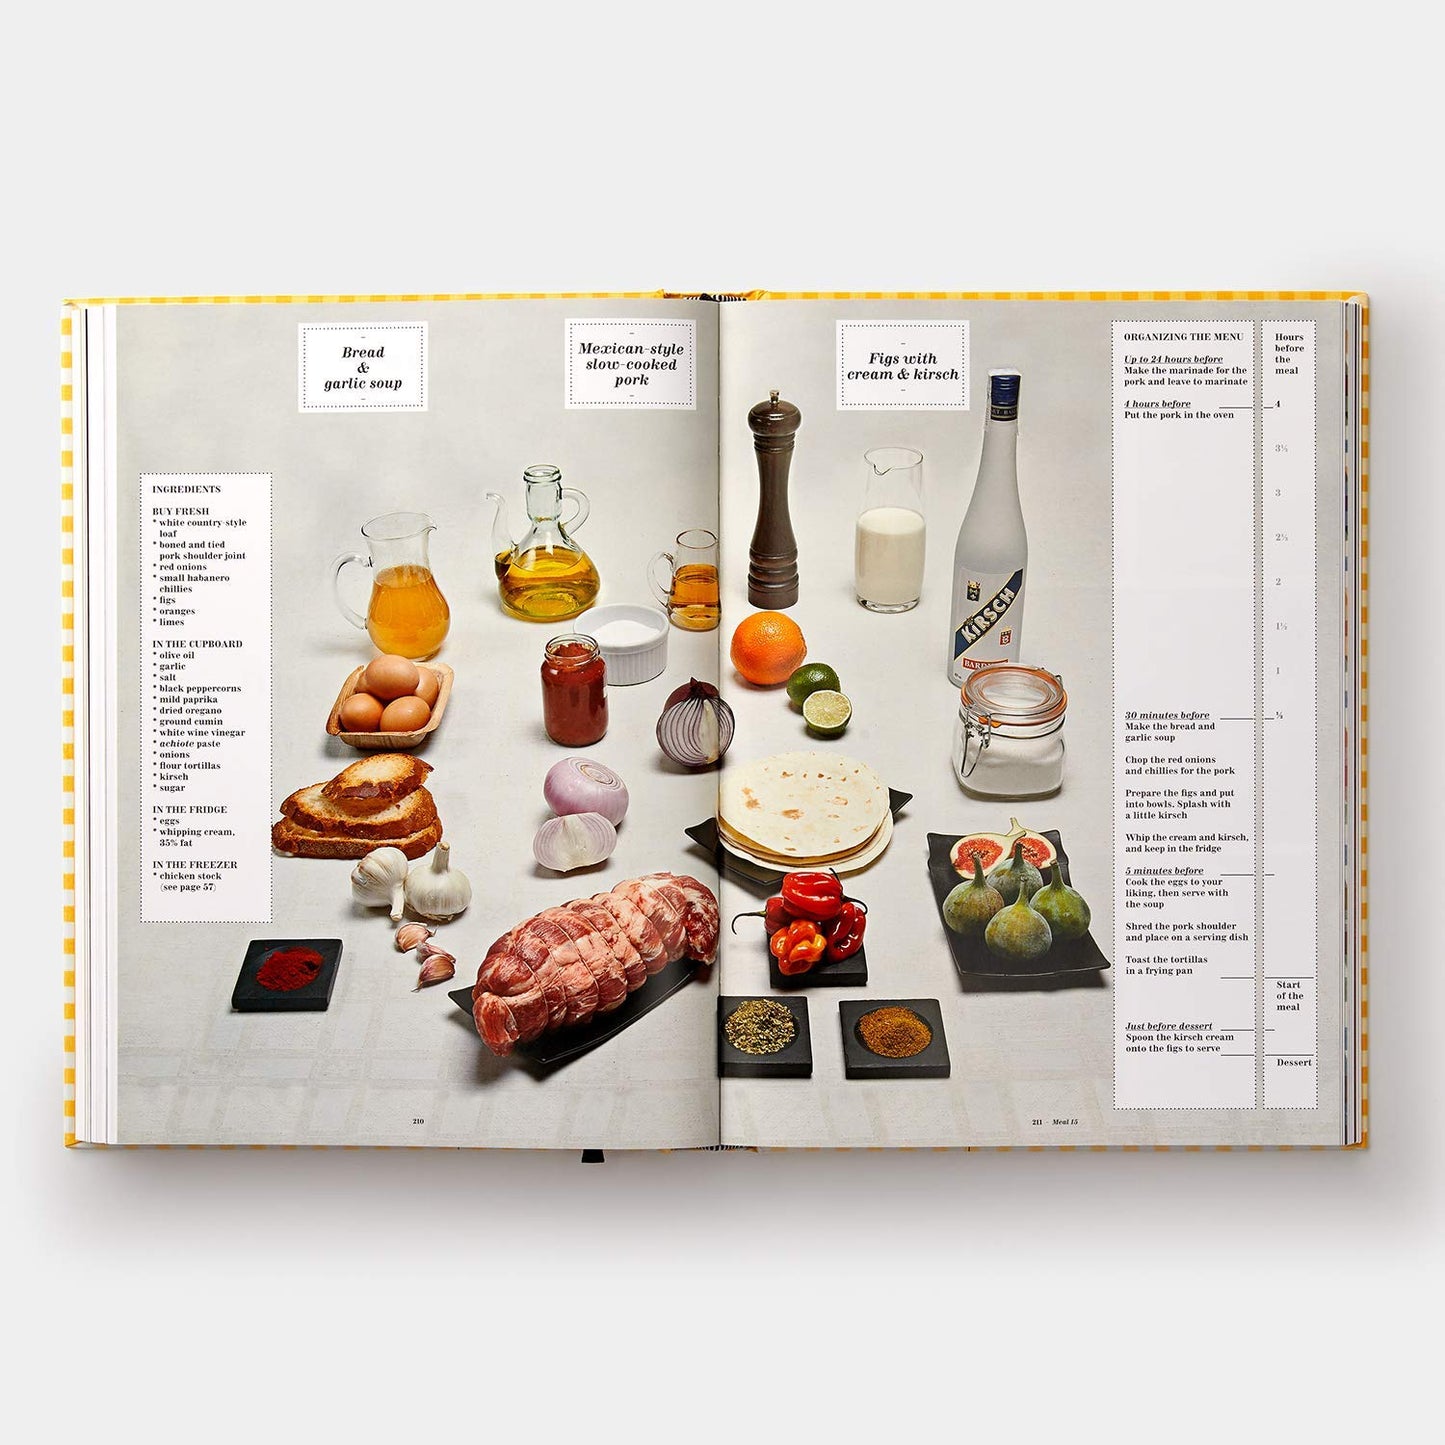 Family Meal: Home Cooking with Ferran Adria, 10th Anniversary Edition